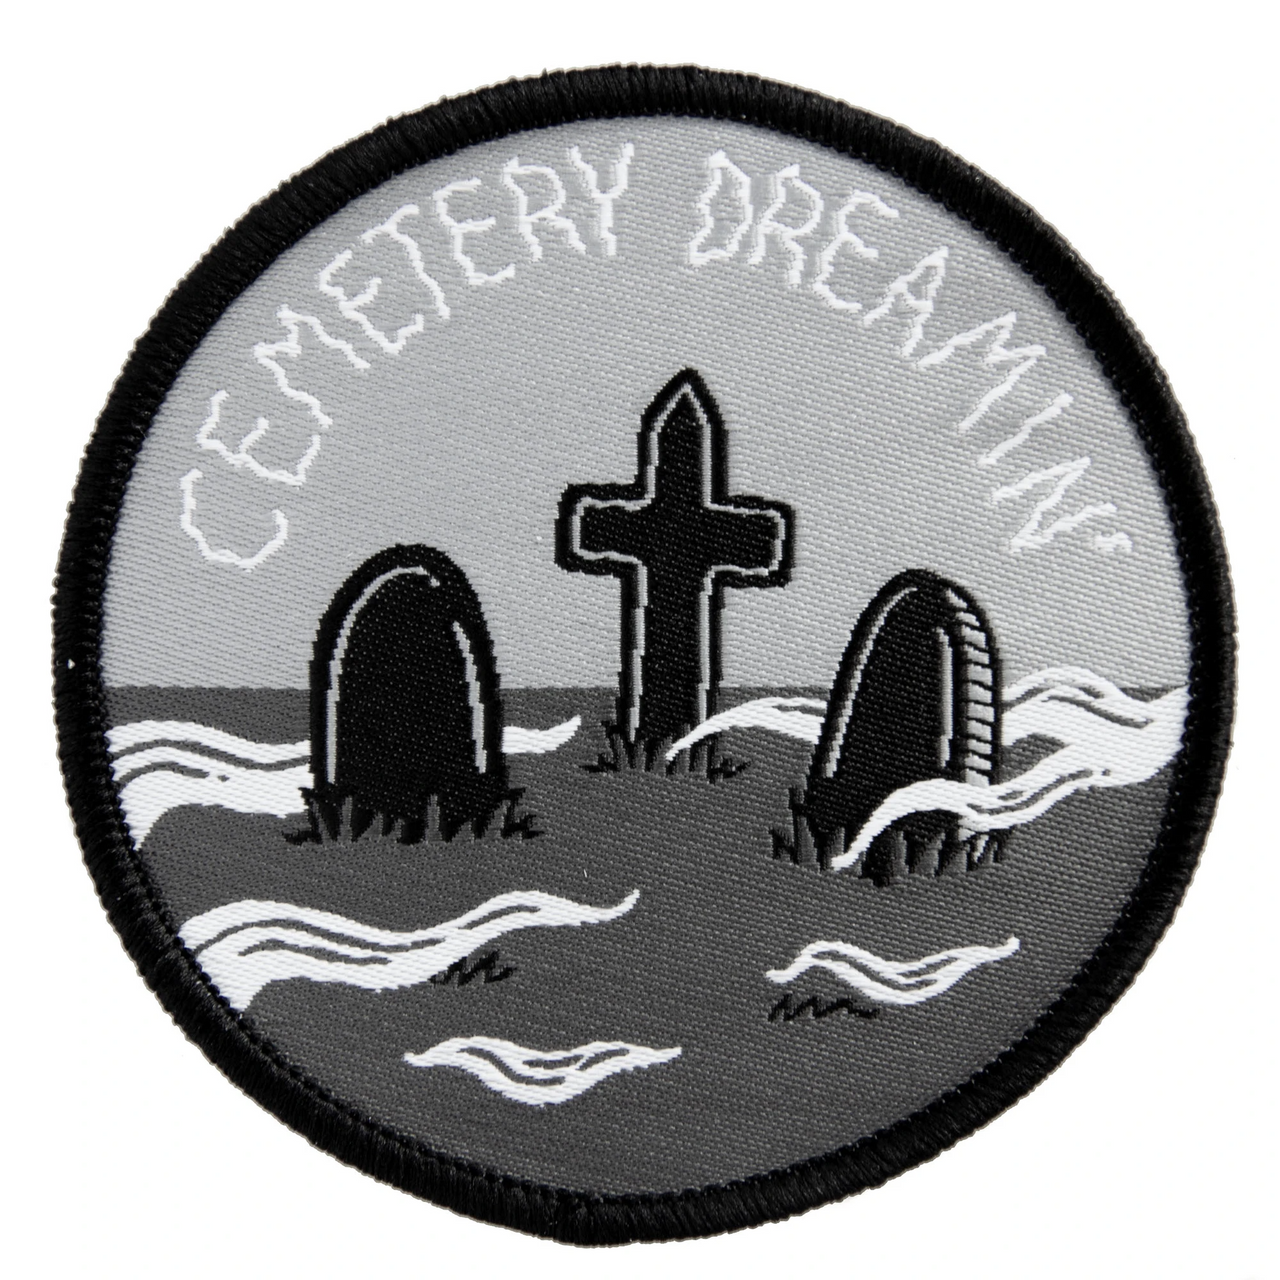 ECTOGASM CEMETERY DREAMING PATCH